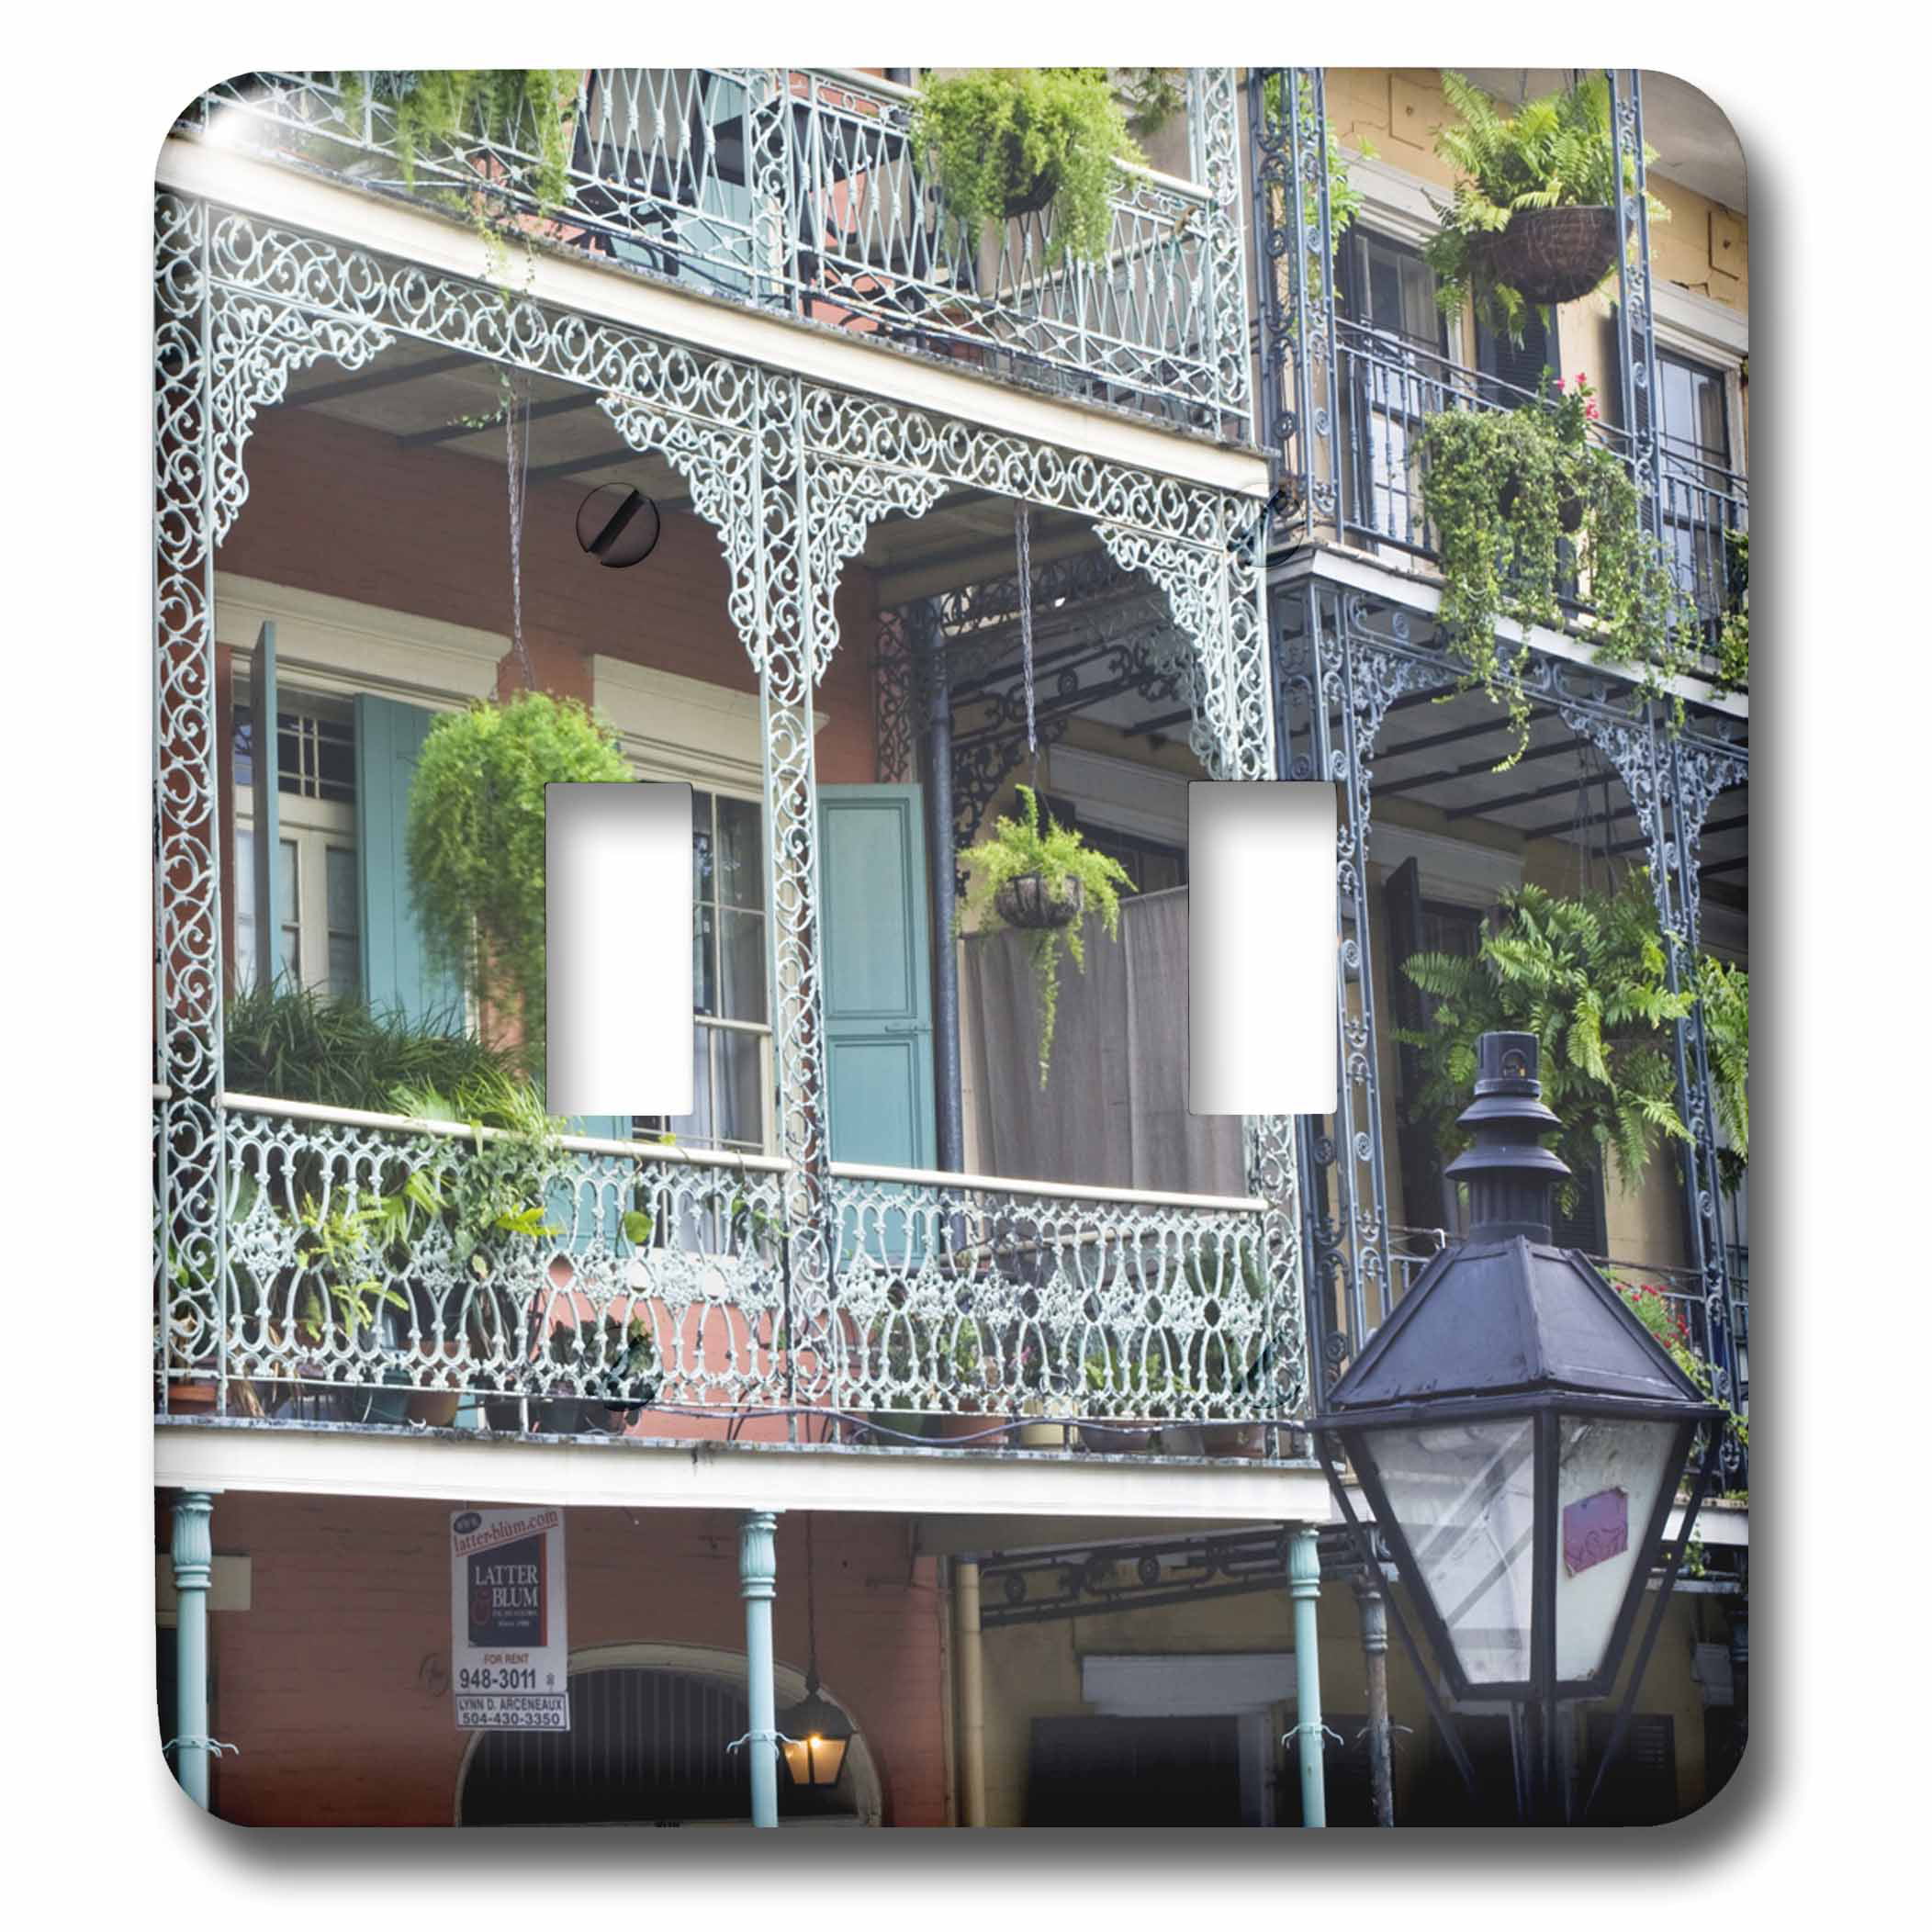 Us19 Rti0002 New Orleans ct_90472_1 Rob Tilley 3dRose Louisiana French Quarter Ceramic Tile 4-Inch